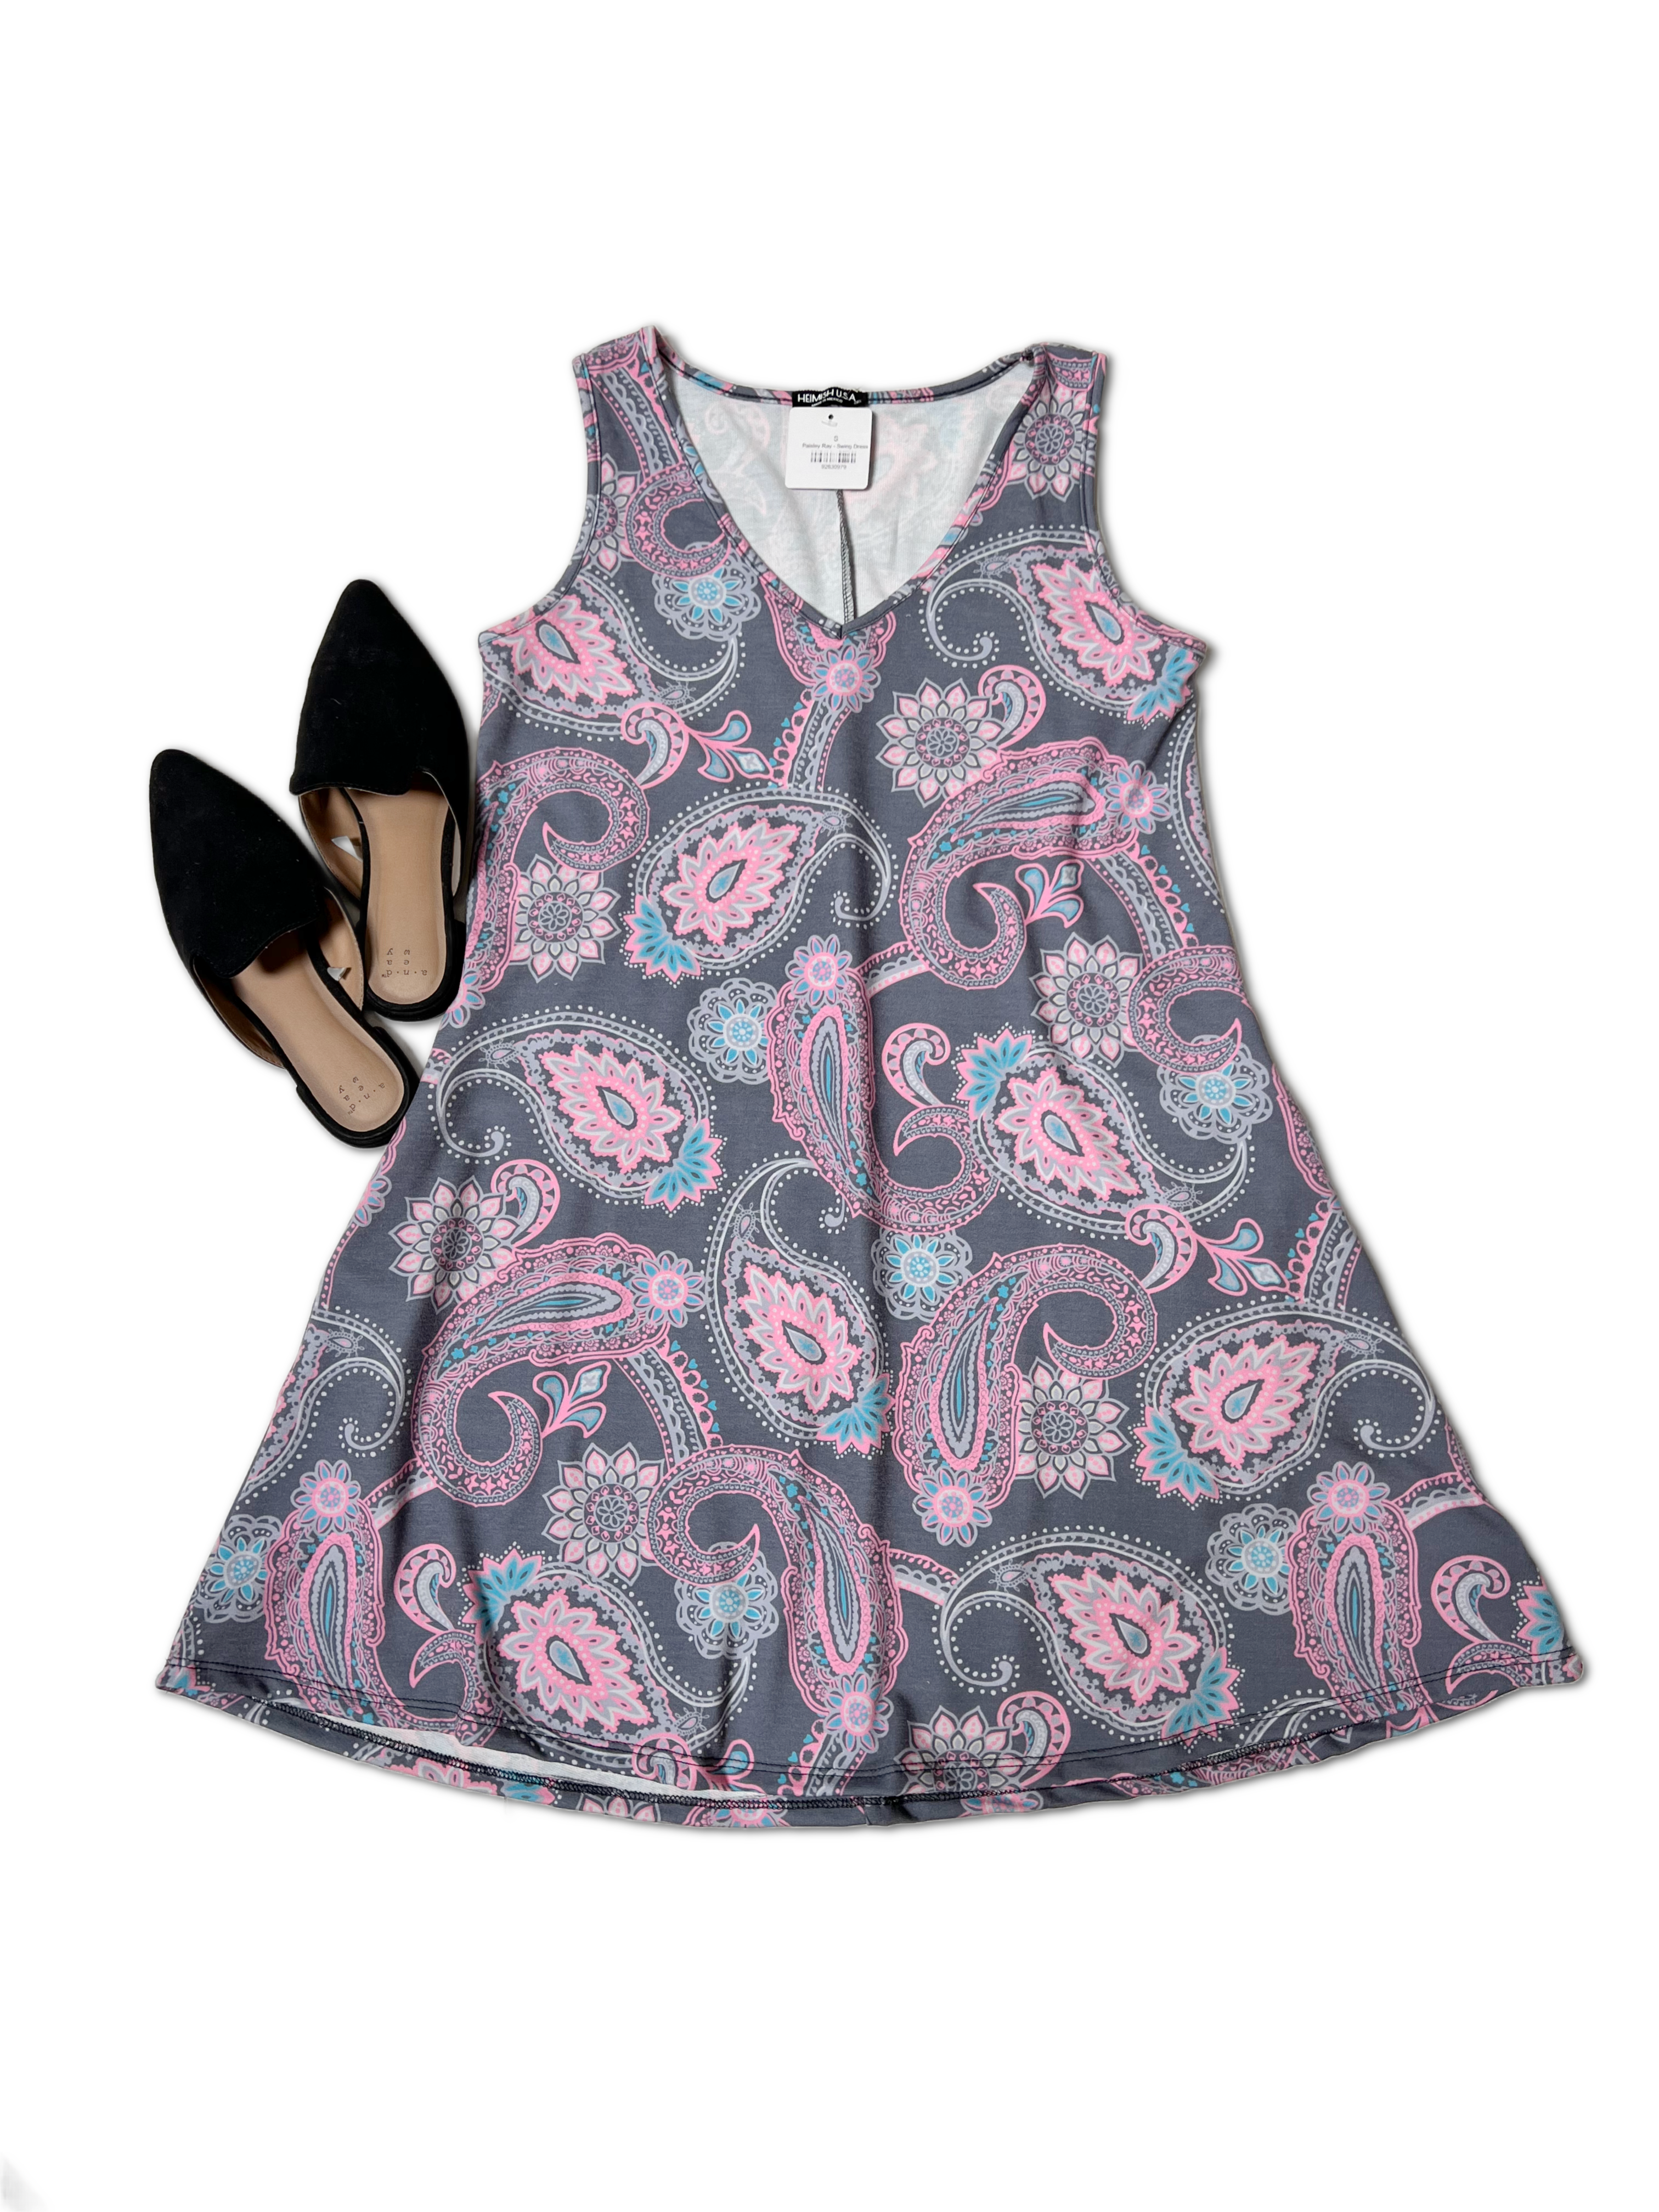 A sleeveless V-neck A-line silhouette dress with a pink and blue paisley print on a gray background is laid flat. To the left of the Paisley Ray - Swing Dress by Heimish, there is a pair of black pointed-toe flats. The image is set against a white background.